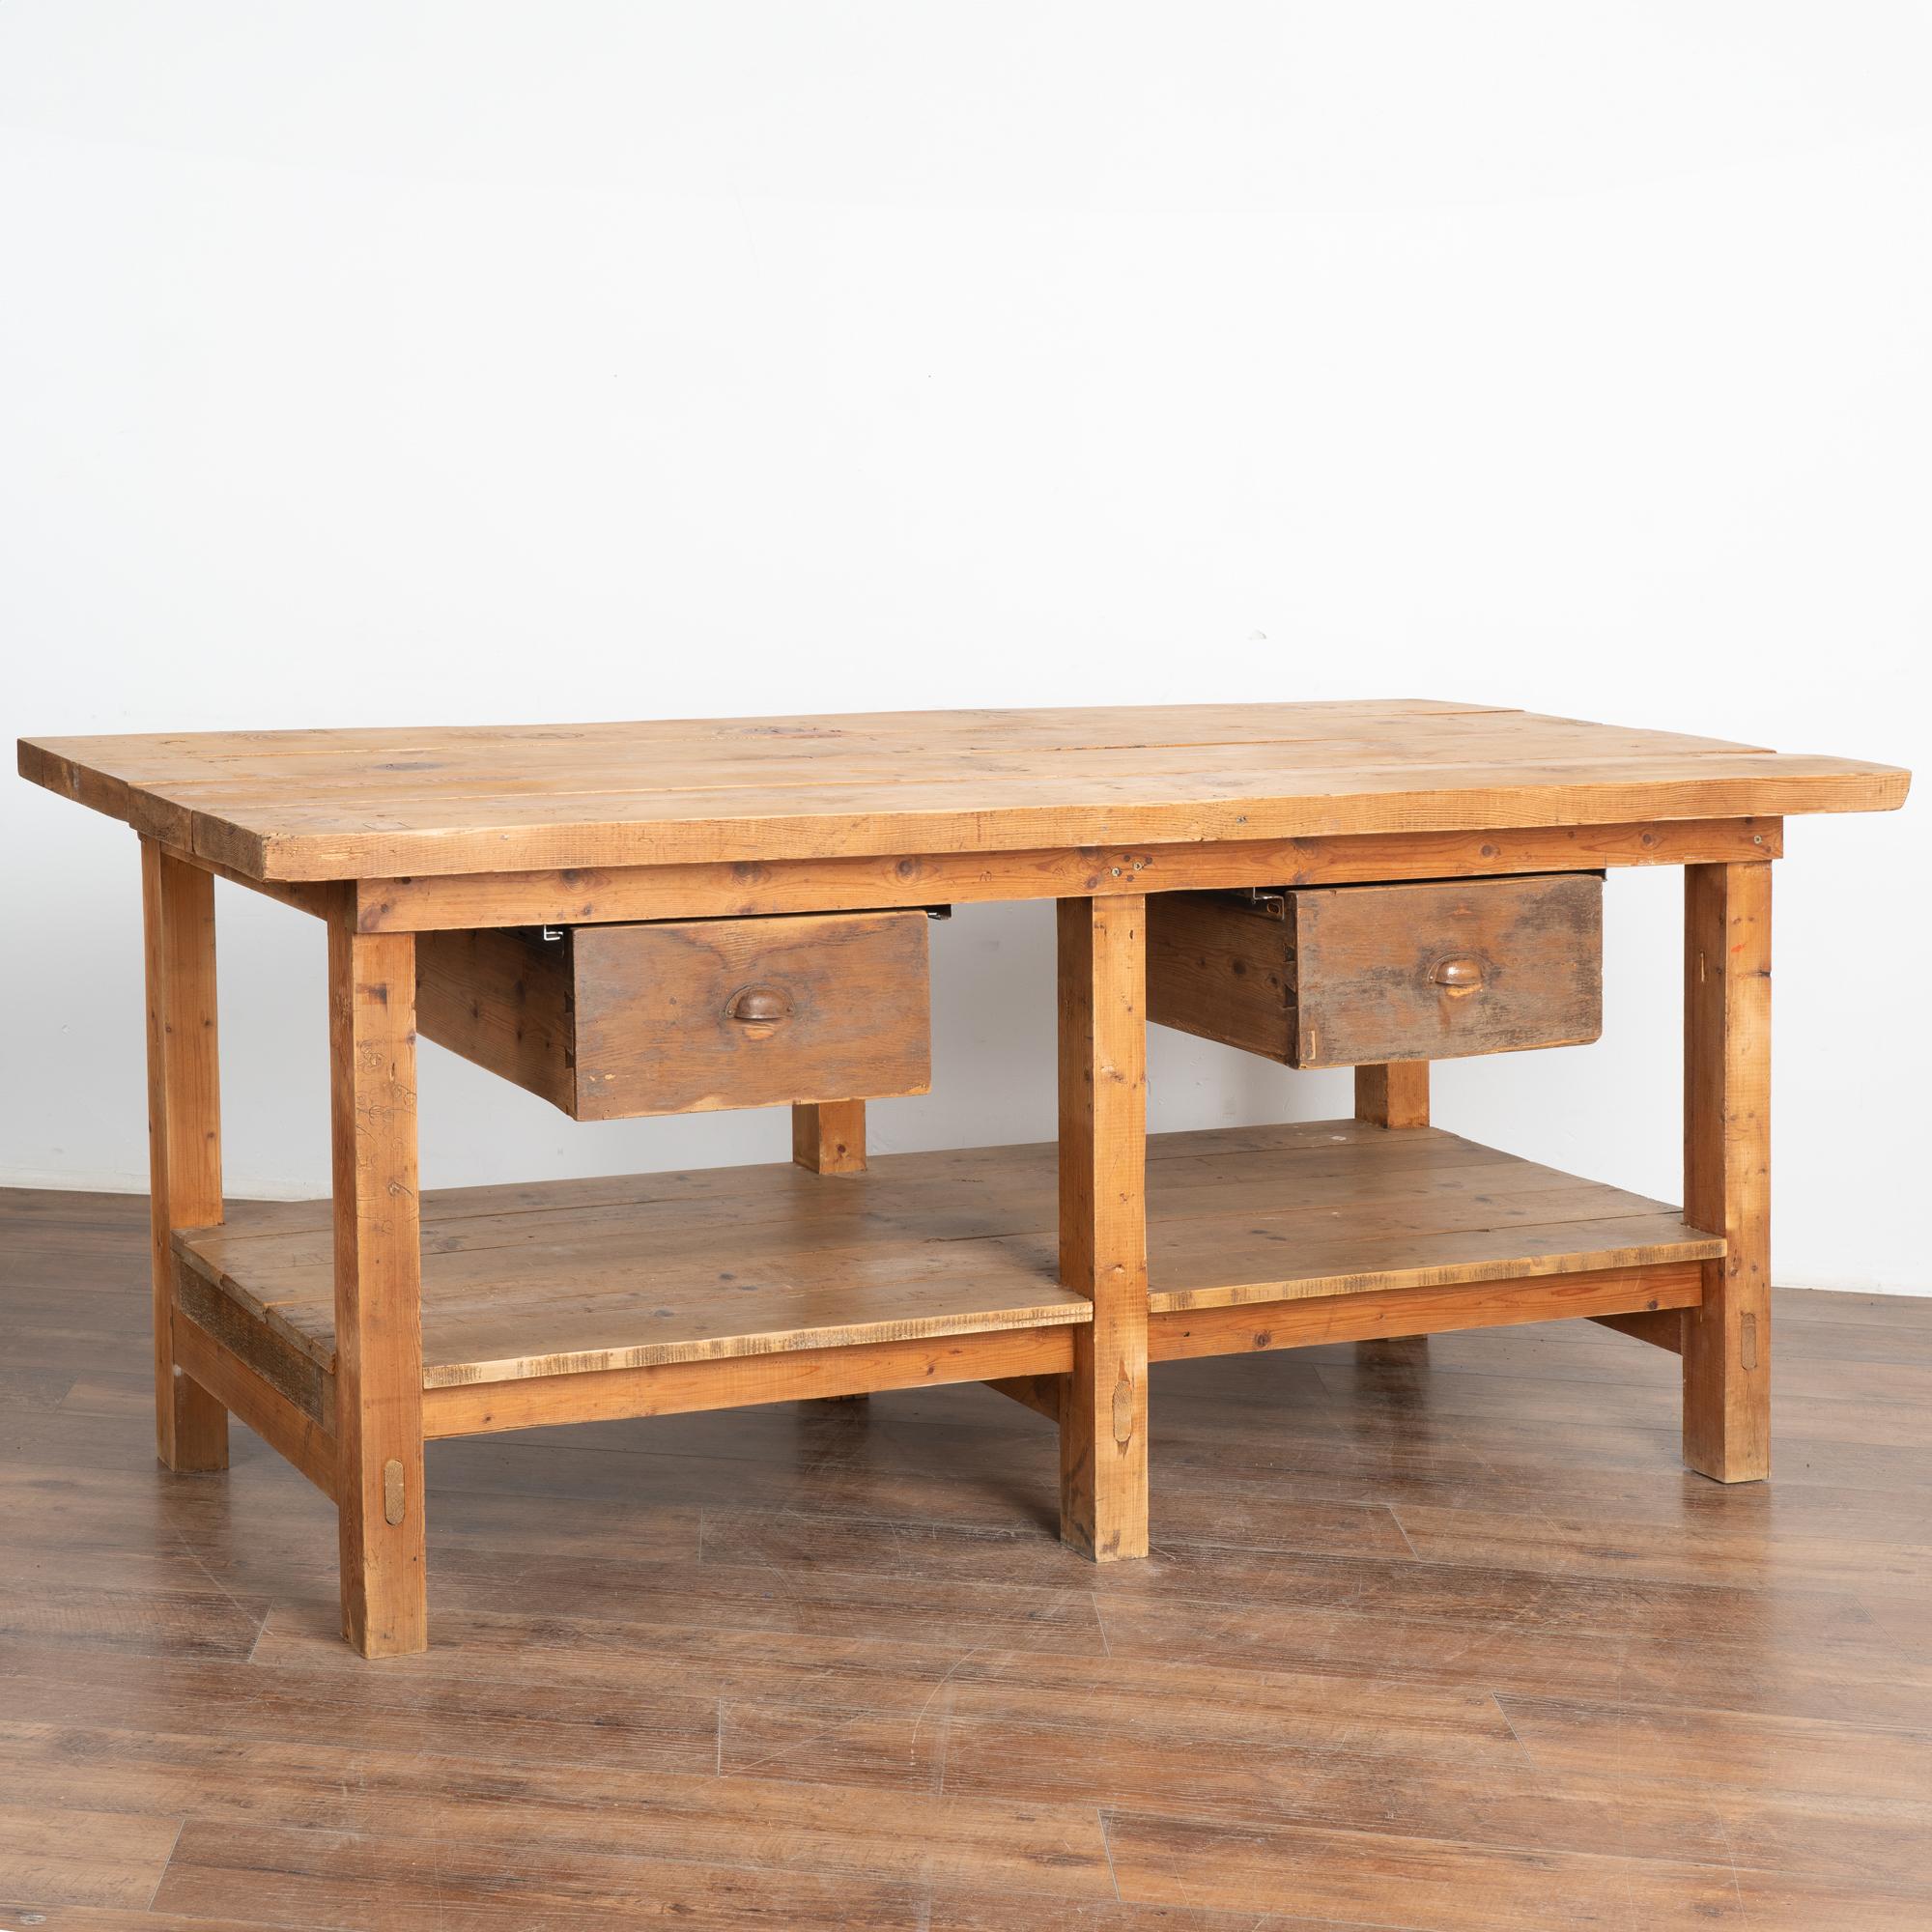 Rustic work table or shop counter with two large drawers and lower shelf. 
This heavily used table reflects generations of use in every gouge, nick, scratch, stains and minor paint. Typical aged separation of planks.
This work table is loaded with